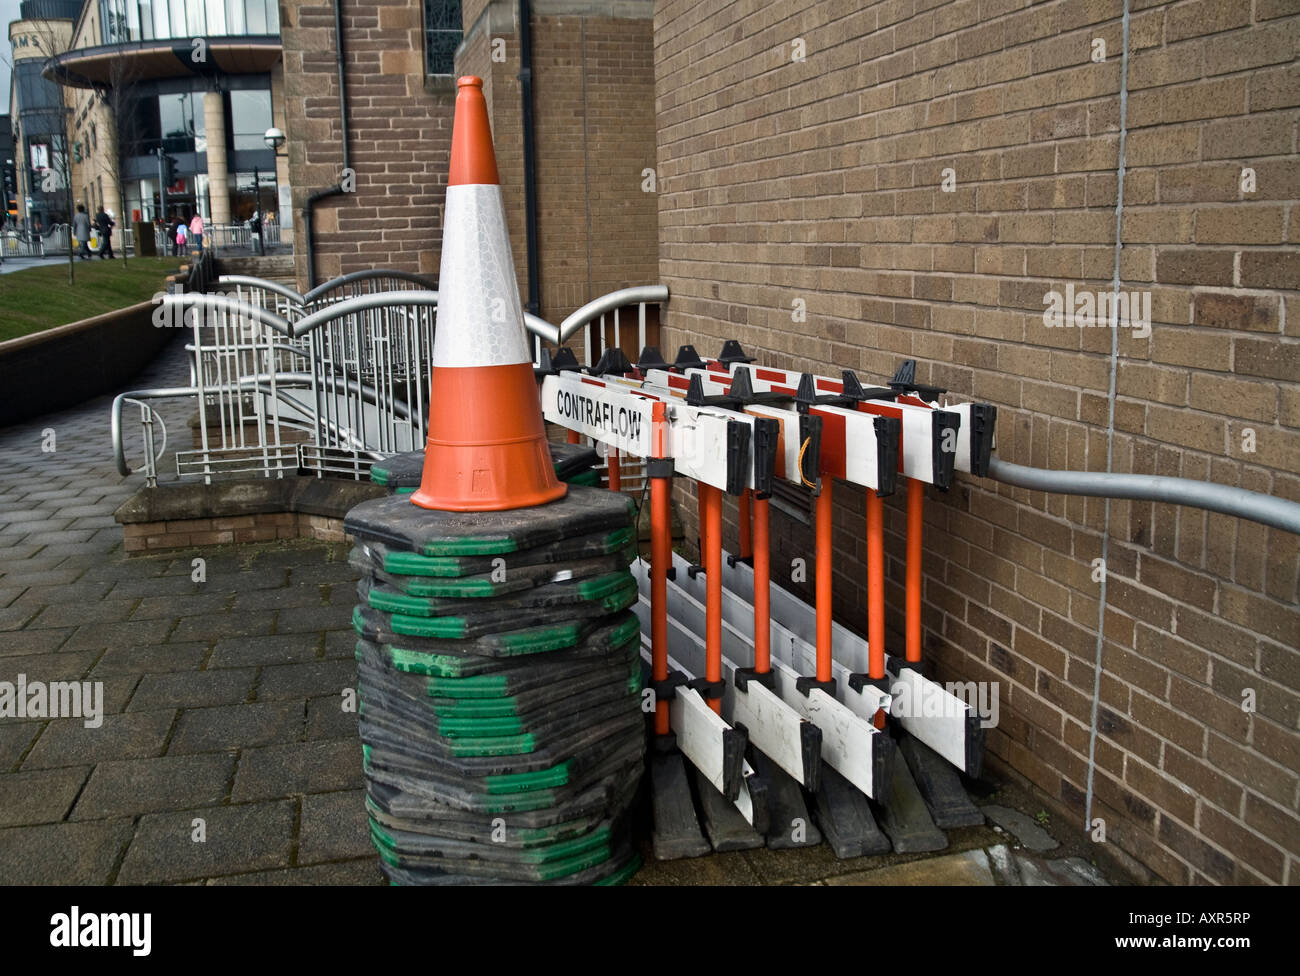 PVC fluorescent contra flow road cones and barriers piled on sidewalk against a building wall in Dundee,UK Stock Photo